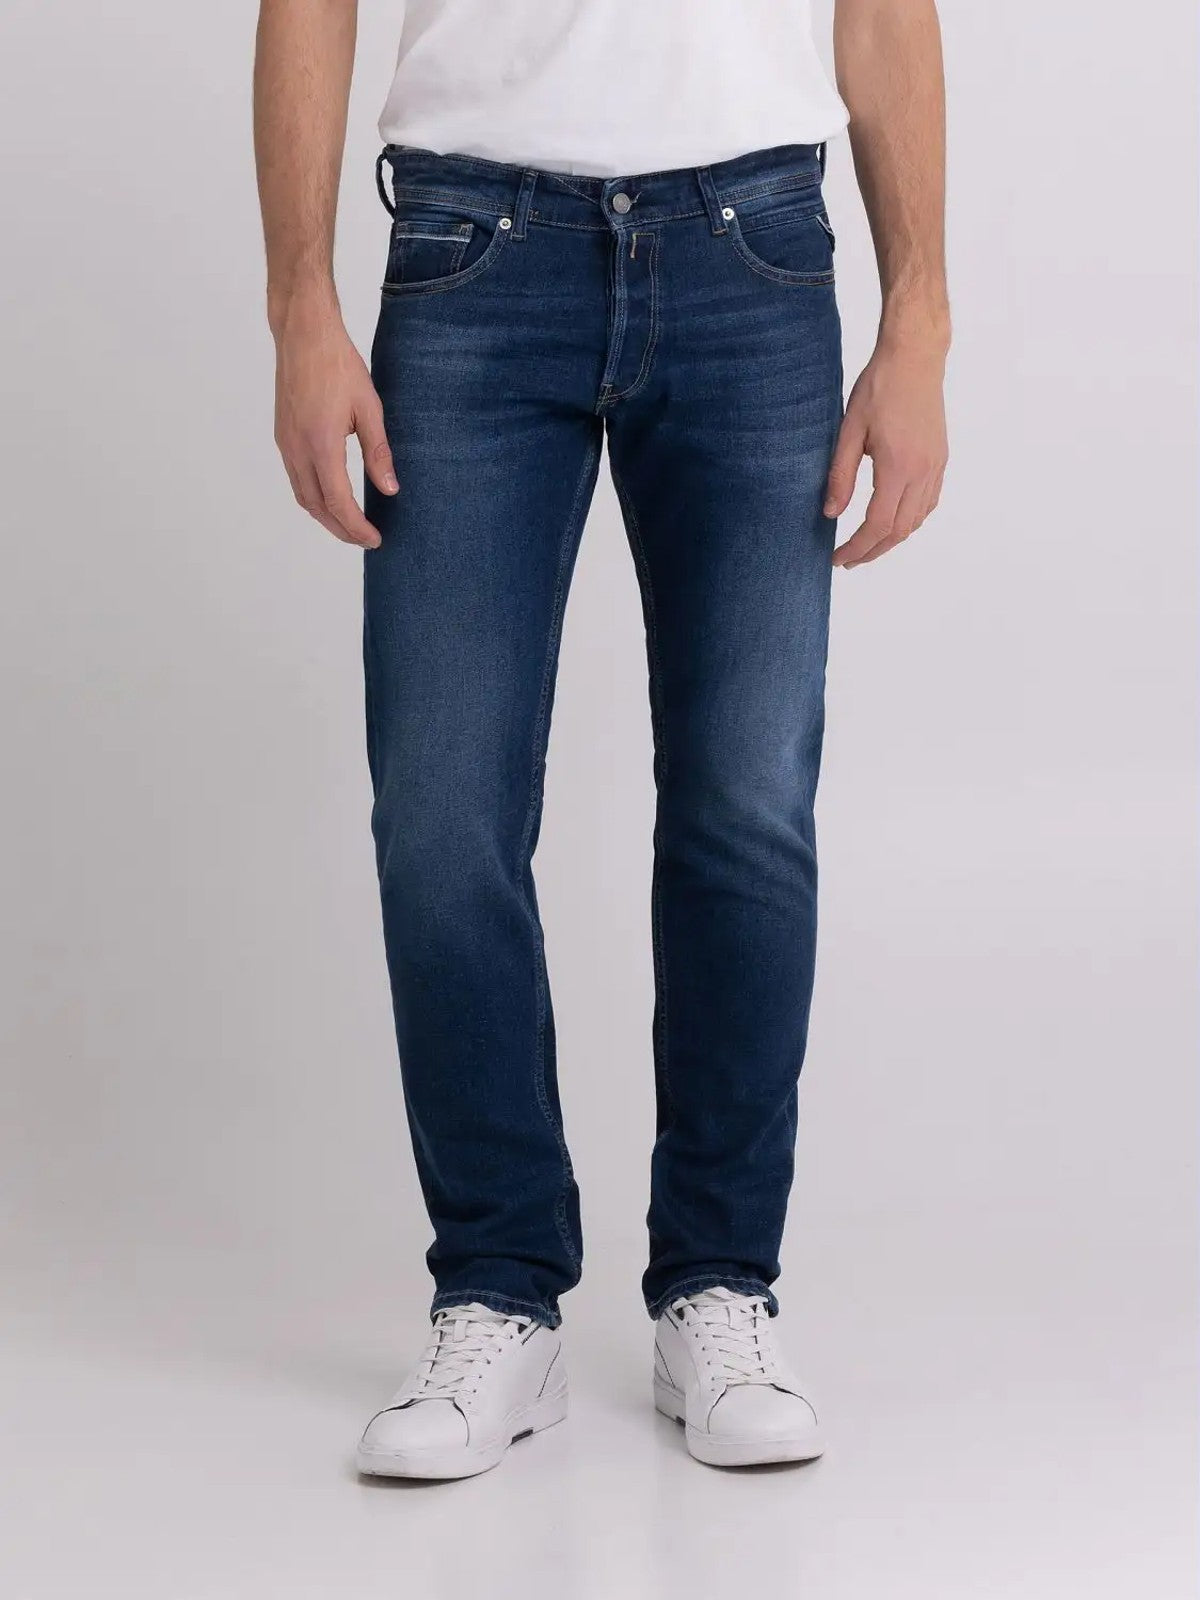 Grover Jeans